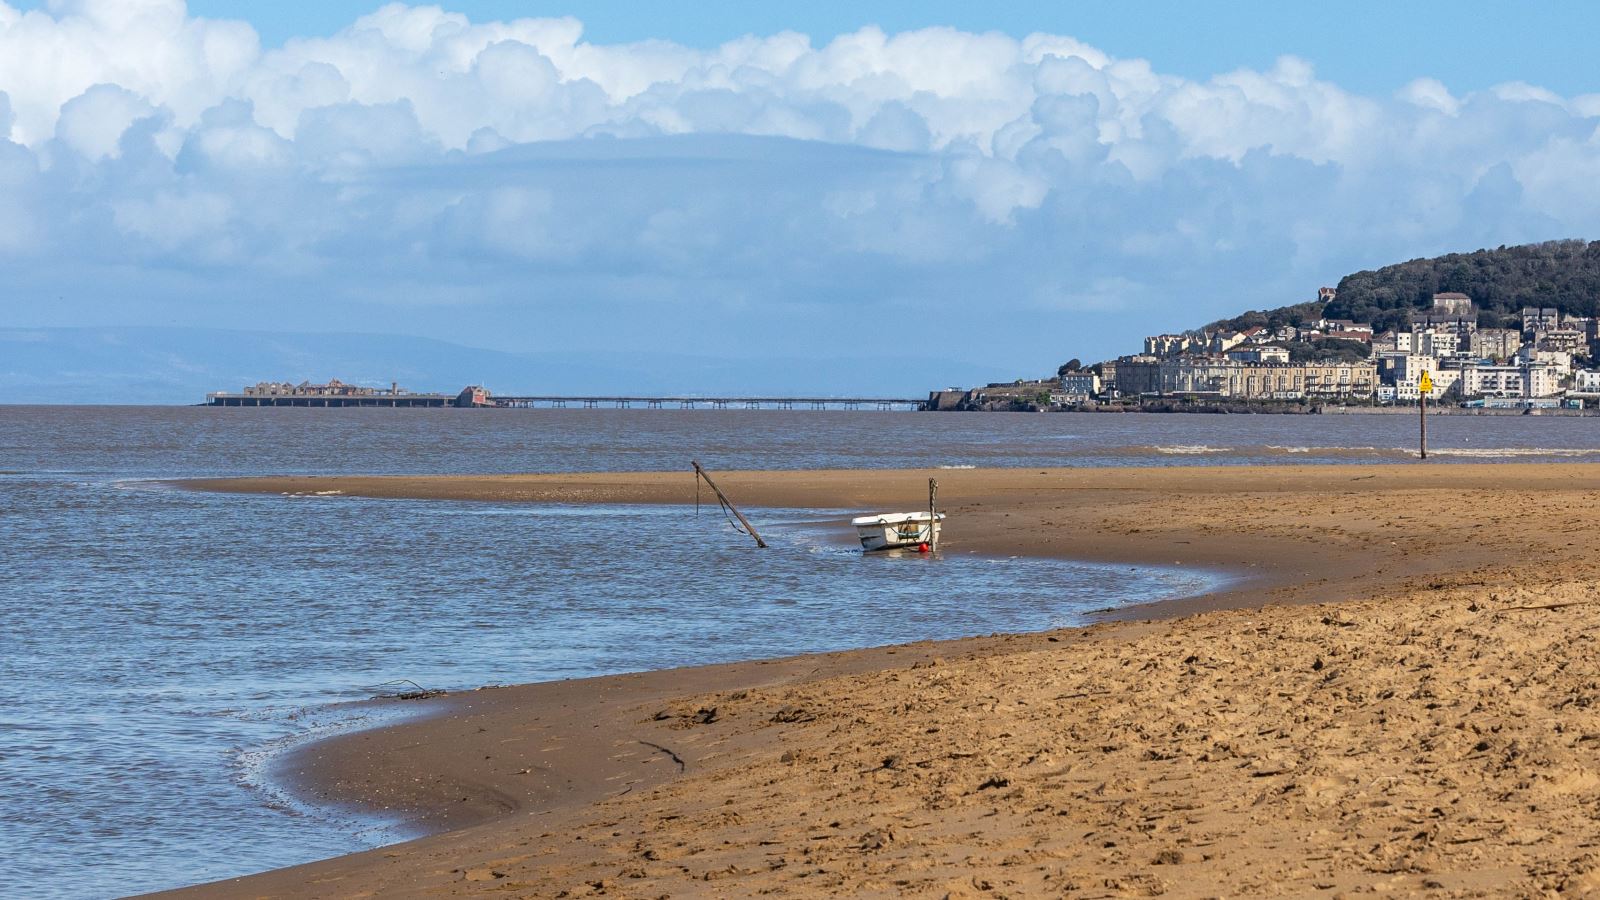 A small boat moored by the estuary on a sandy beach